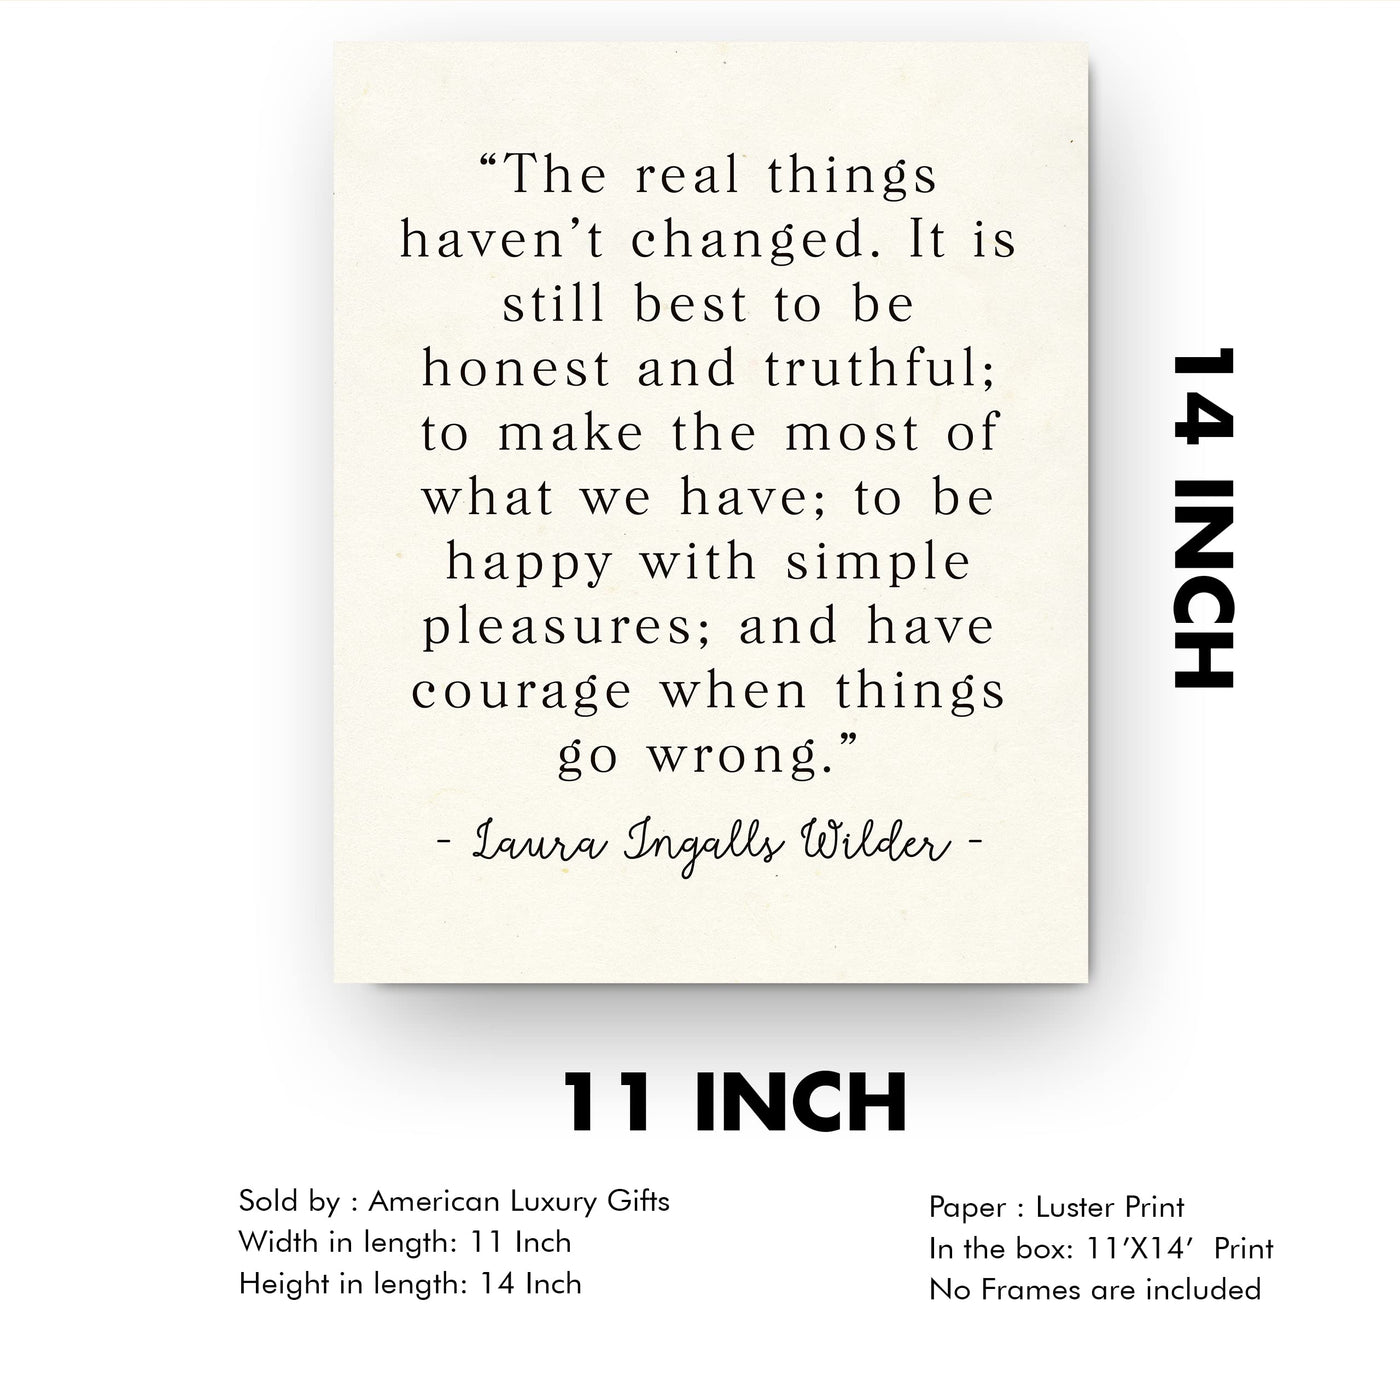 The Real Things Haven't Changed Inspirational Wall Art Sign - 11 x 14"-Ready to Frame. Motivational Poster Print Ideal for Home-Office-Farmhouse-Classroom-Dorm Decor. Quote By Laura Ingalls Wilder.